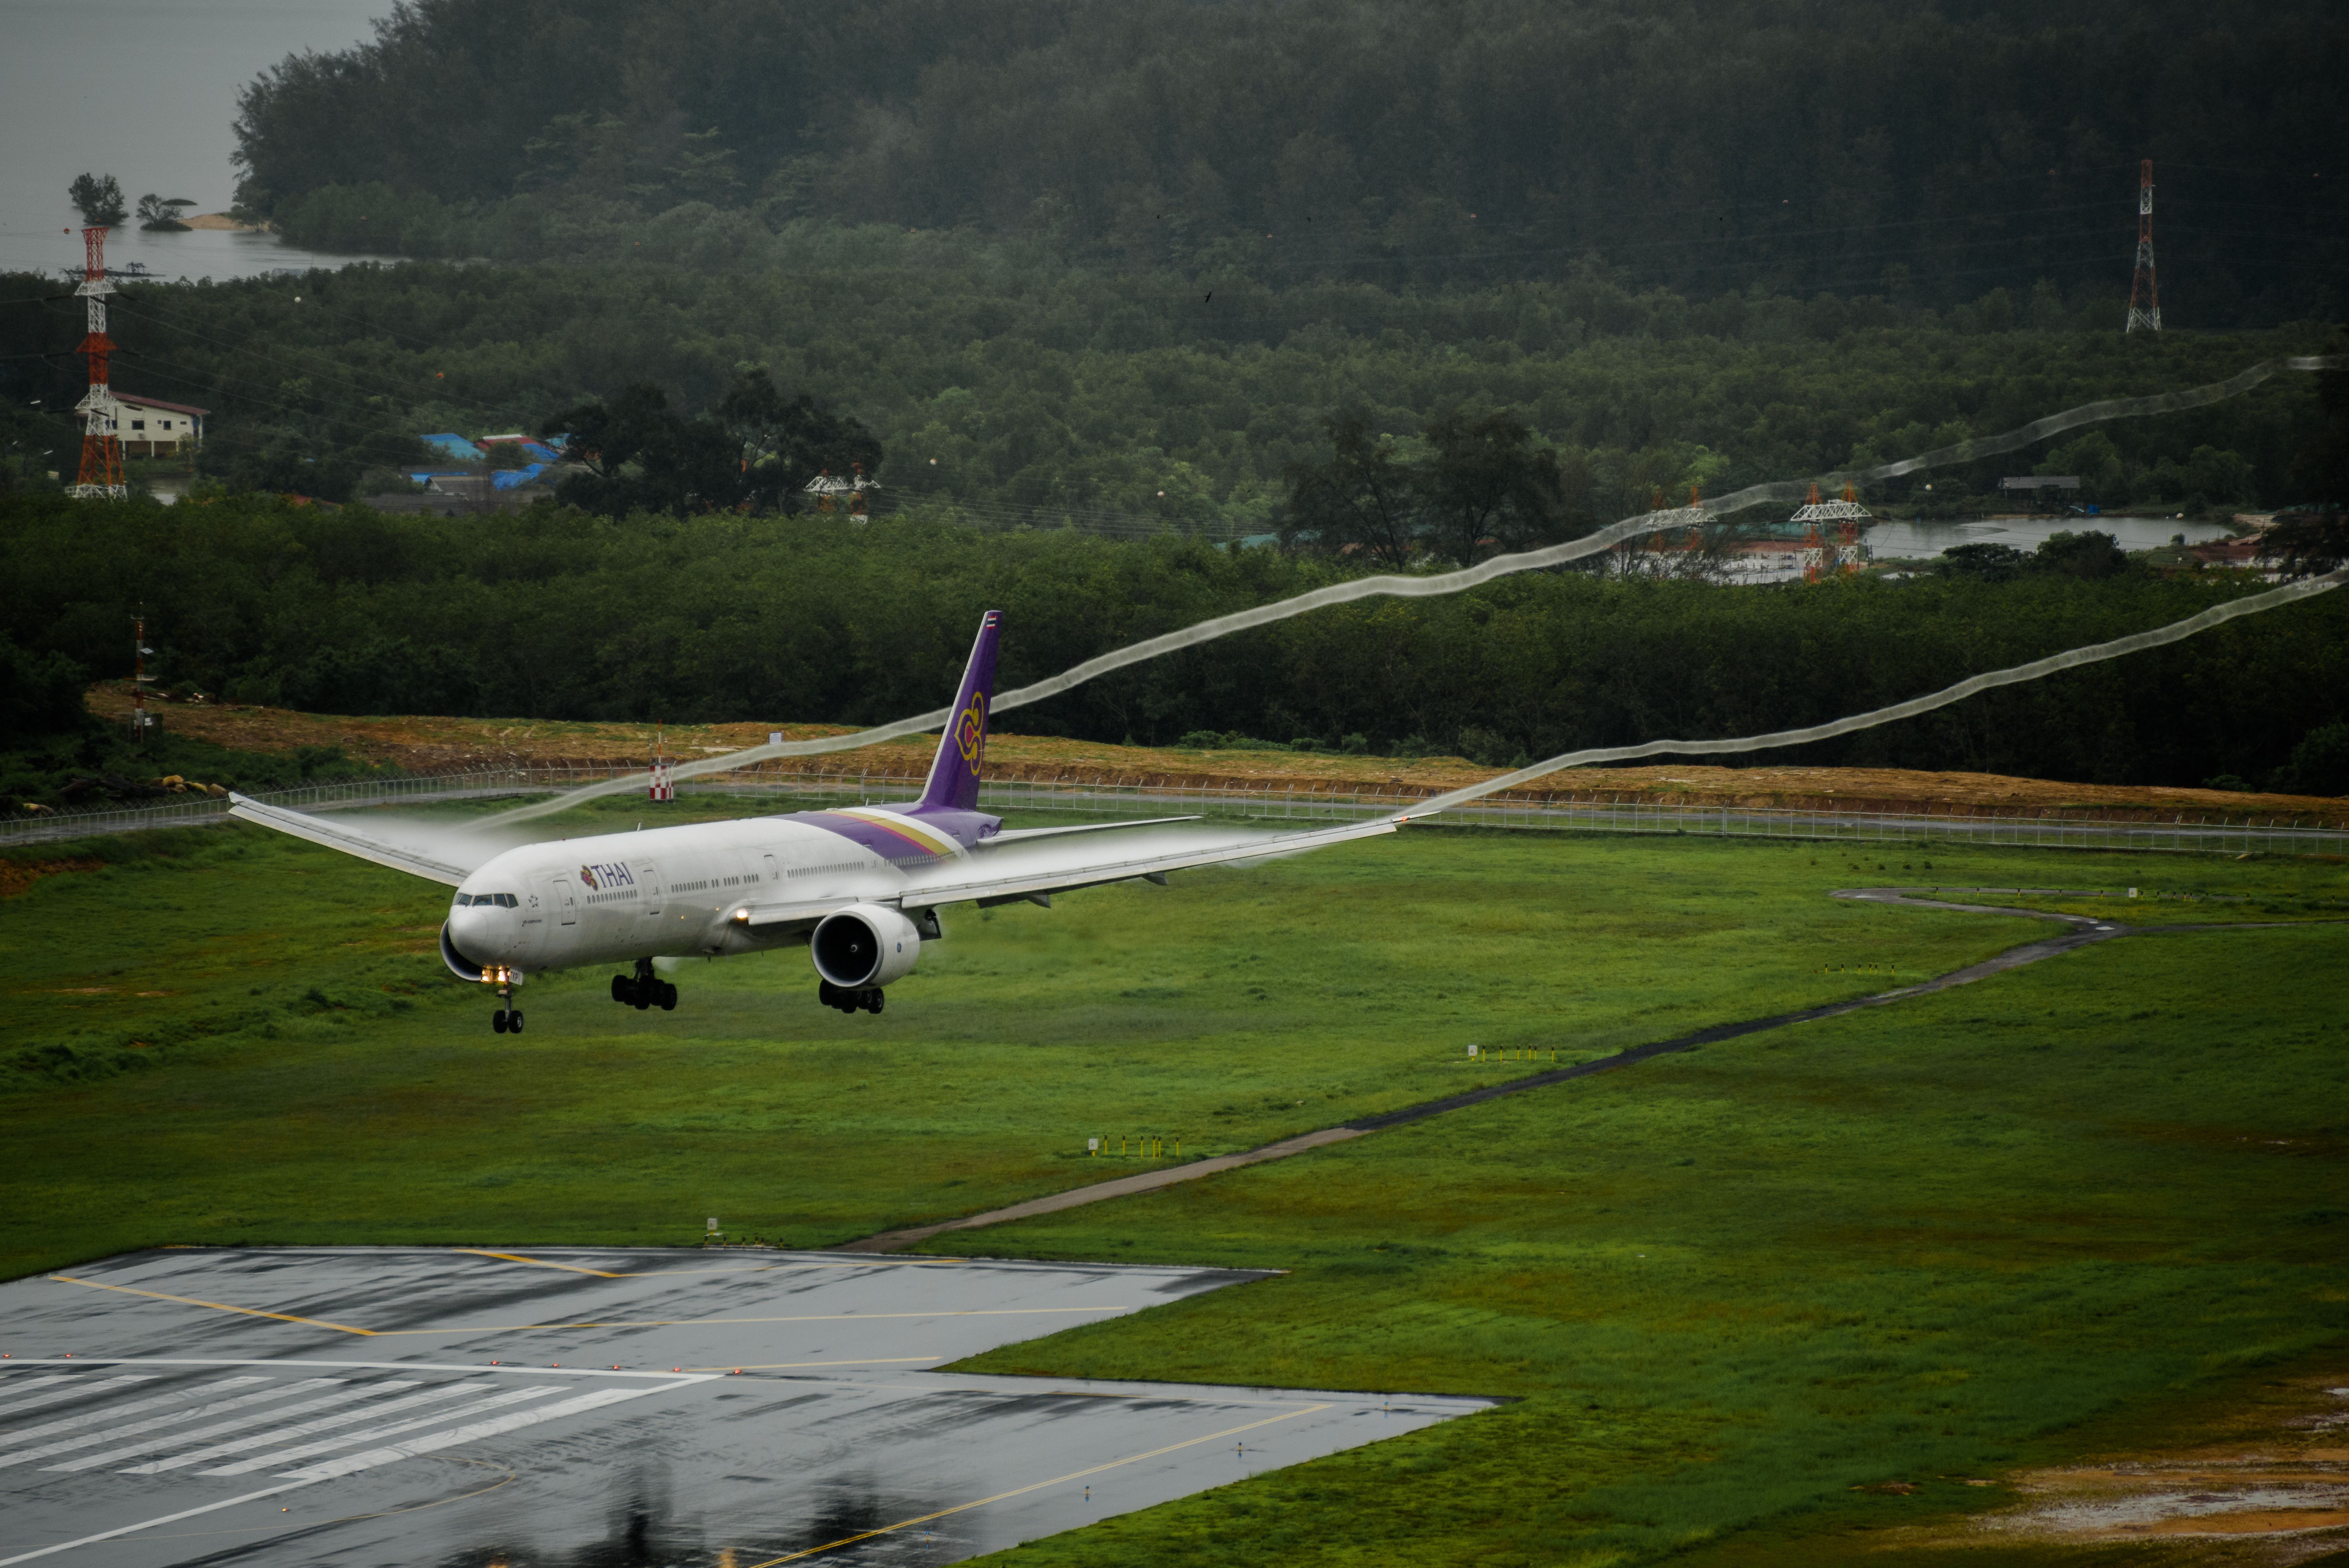 A Thai Airways aircraft about to land on a humid day in Thailand.